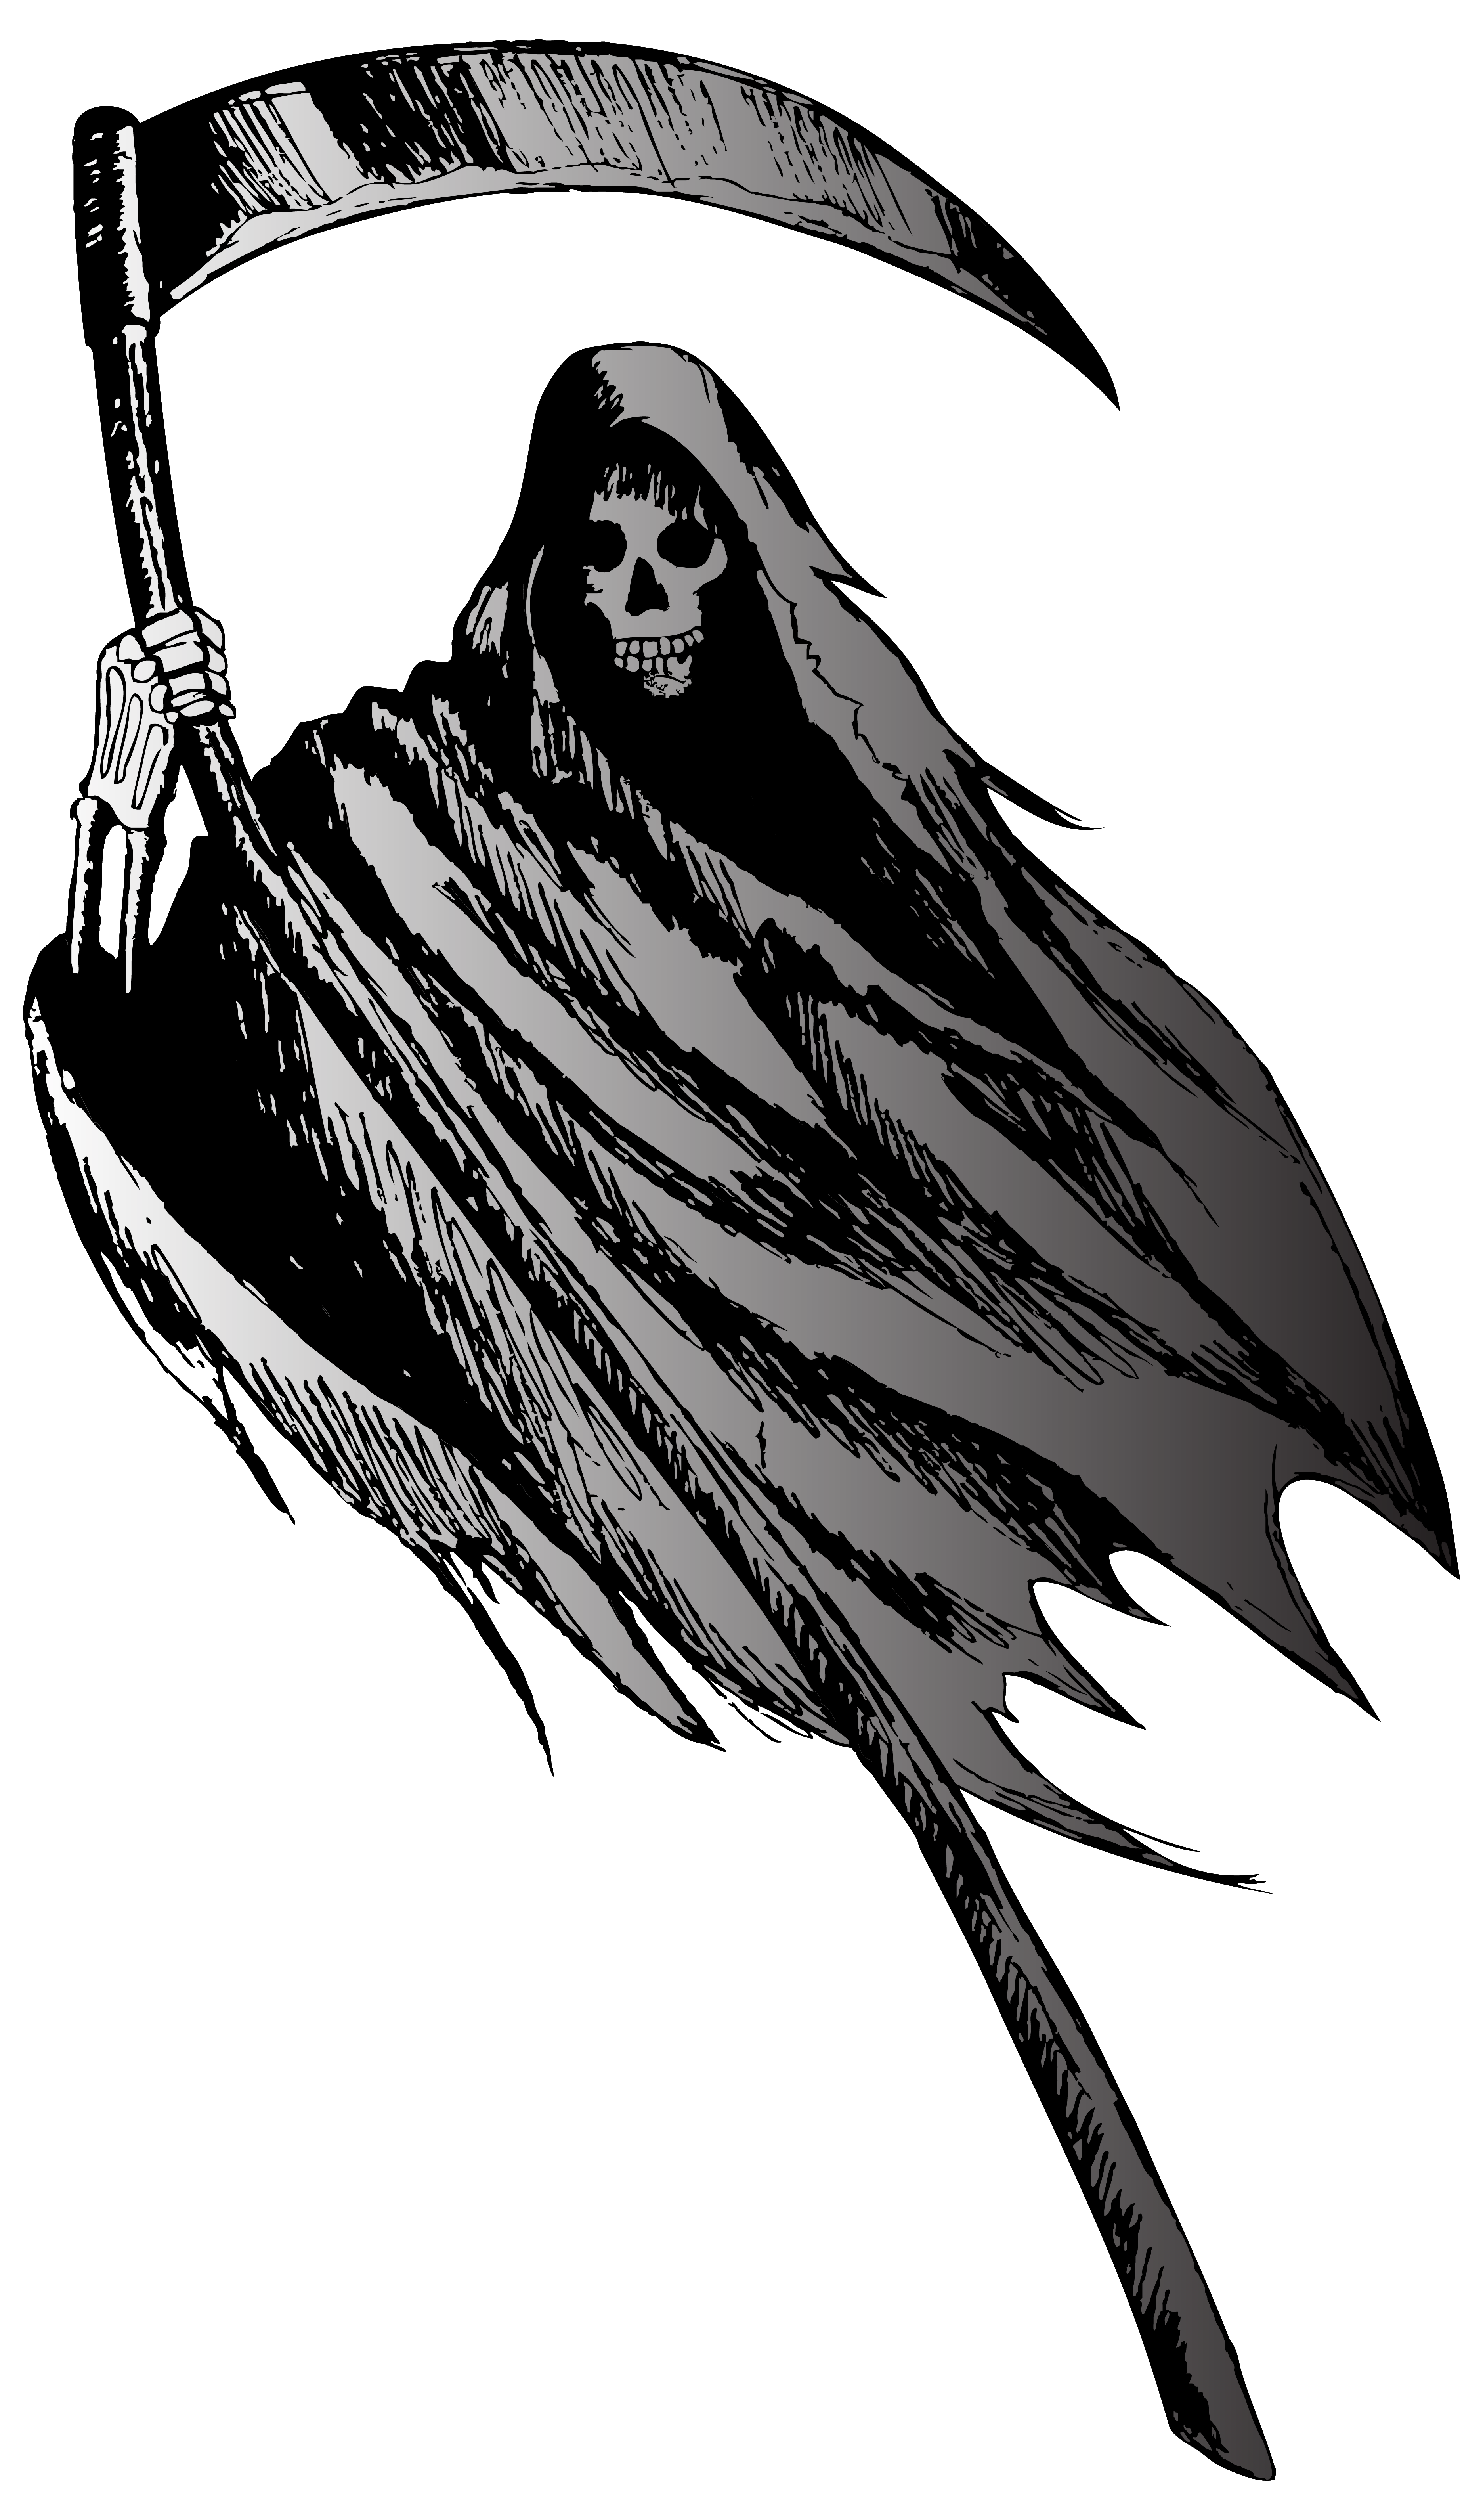 Grim reaper clipart basic. Png image gallery yopriceville